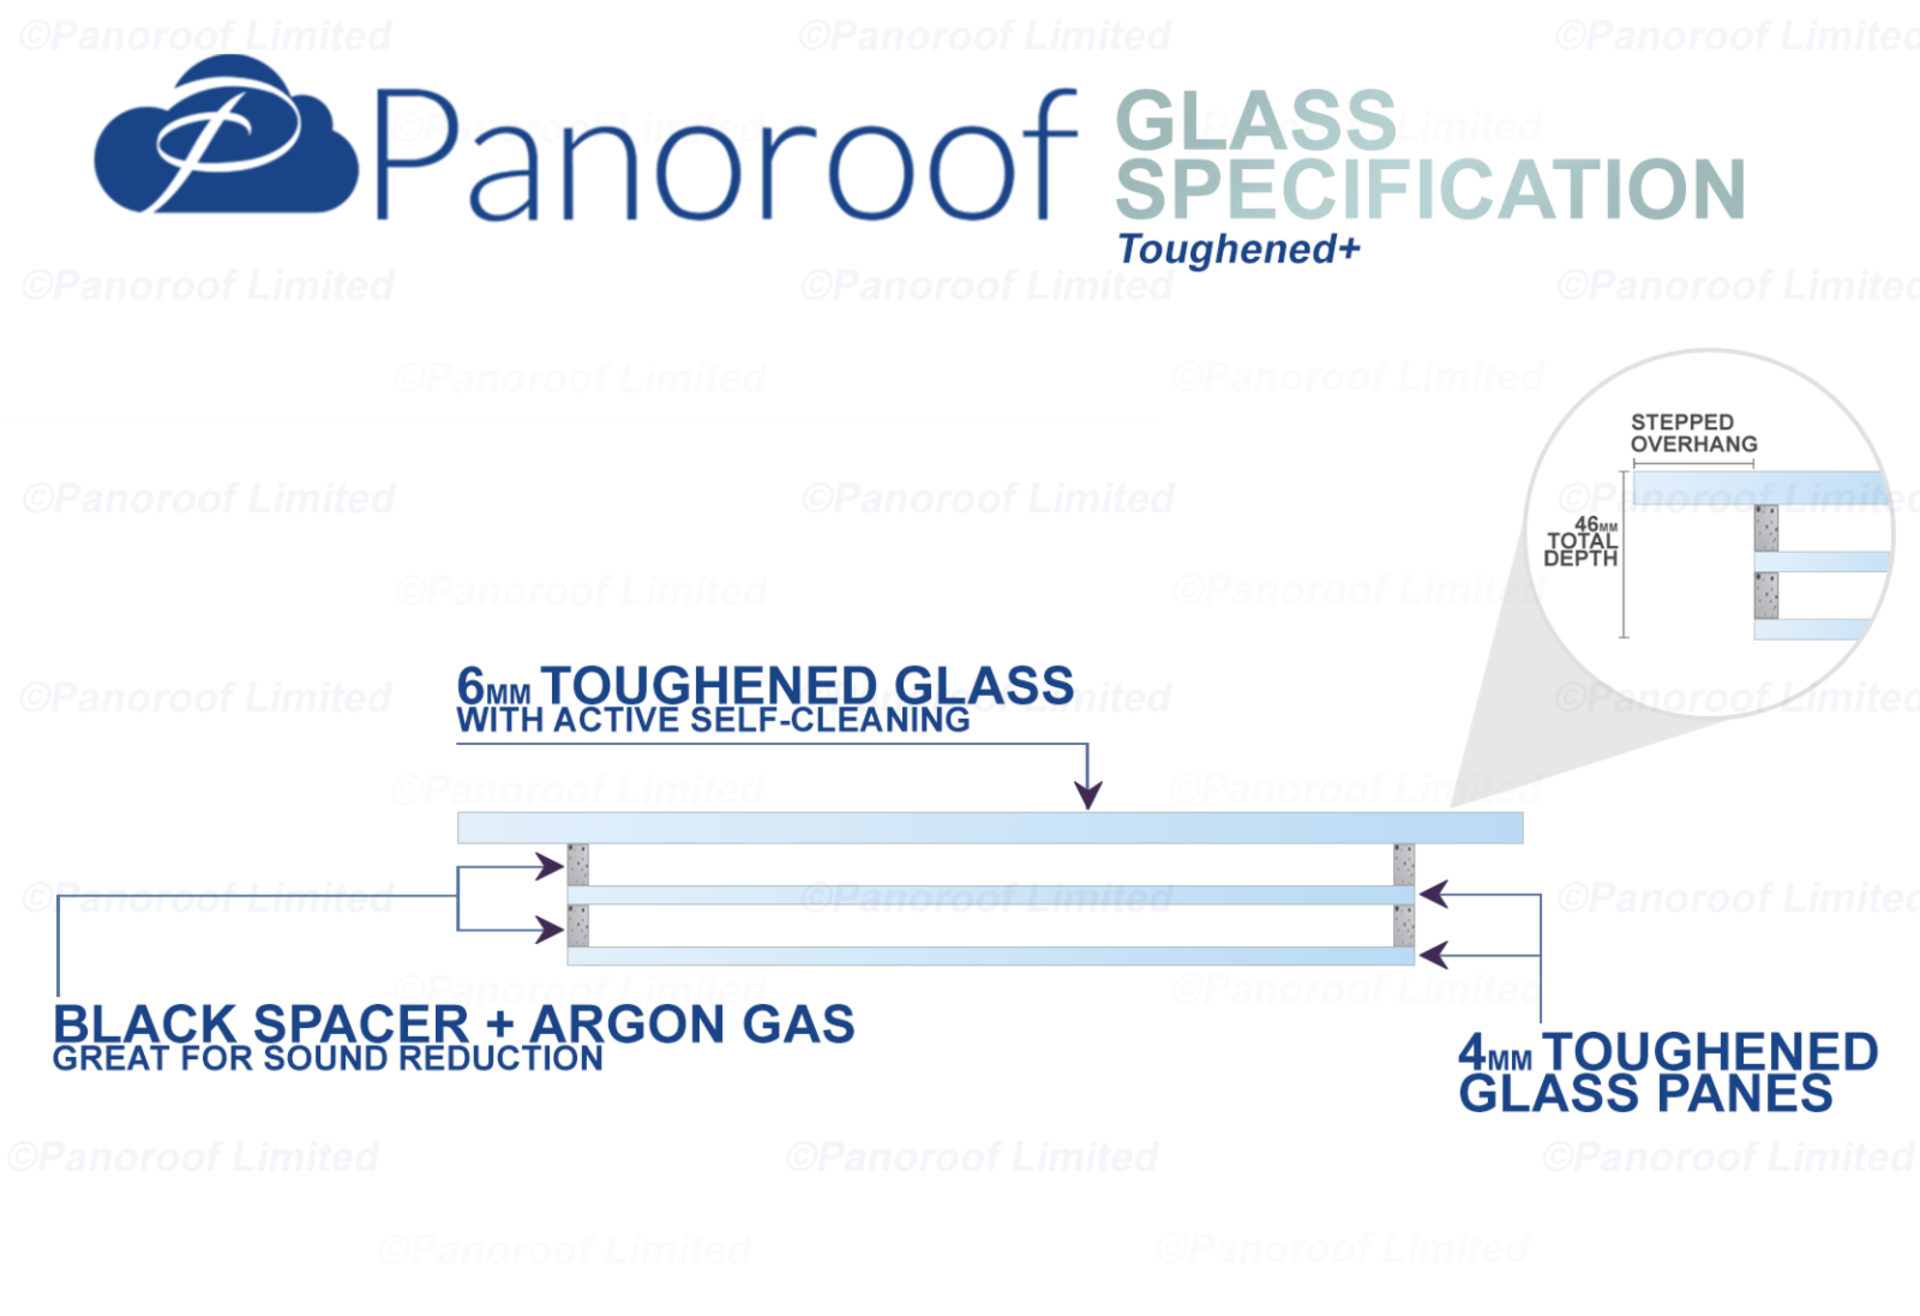 """Panoroof Triple Glazed Self Cleaning 800x1000mm (inside Size Visable glass area) Seamless Glass - Image 4 of 6